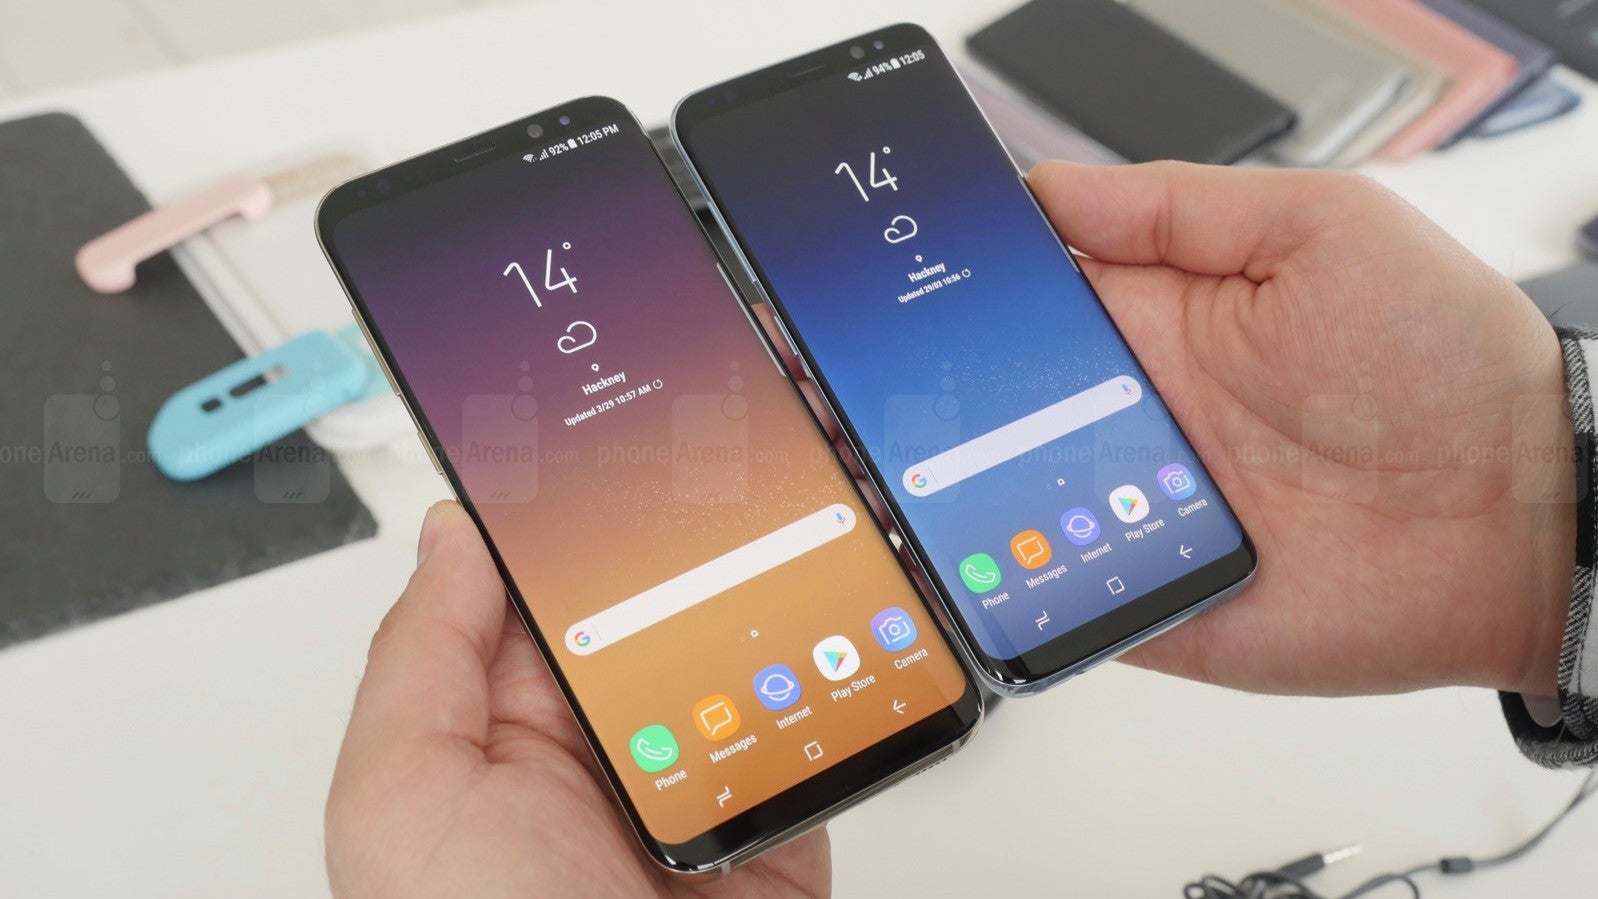 Samsung Galaxy S8 sells "almost twice as fast" compared to S7... in Korea